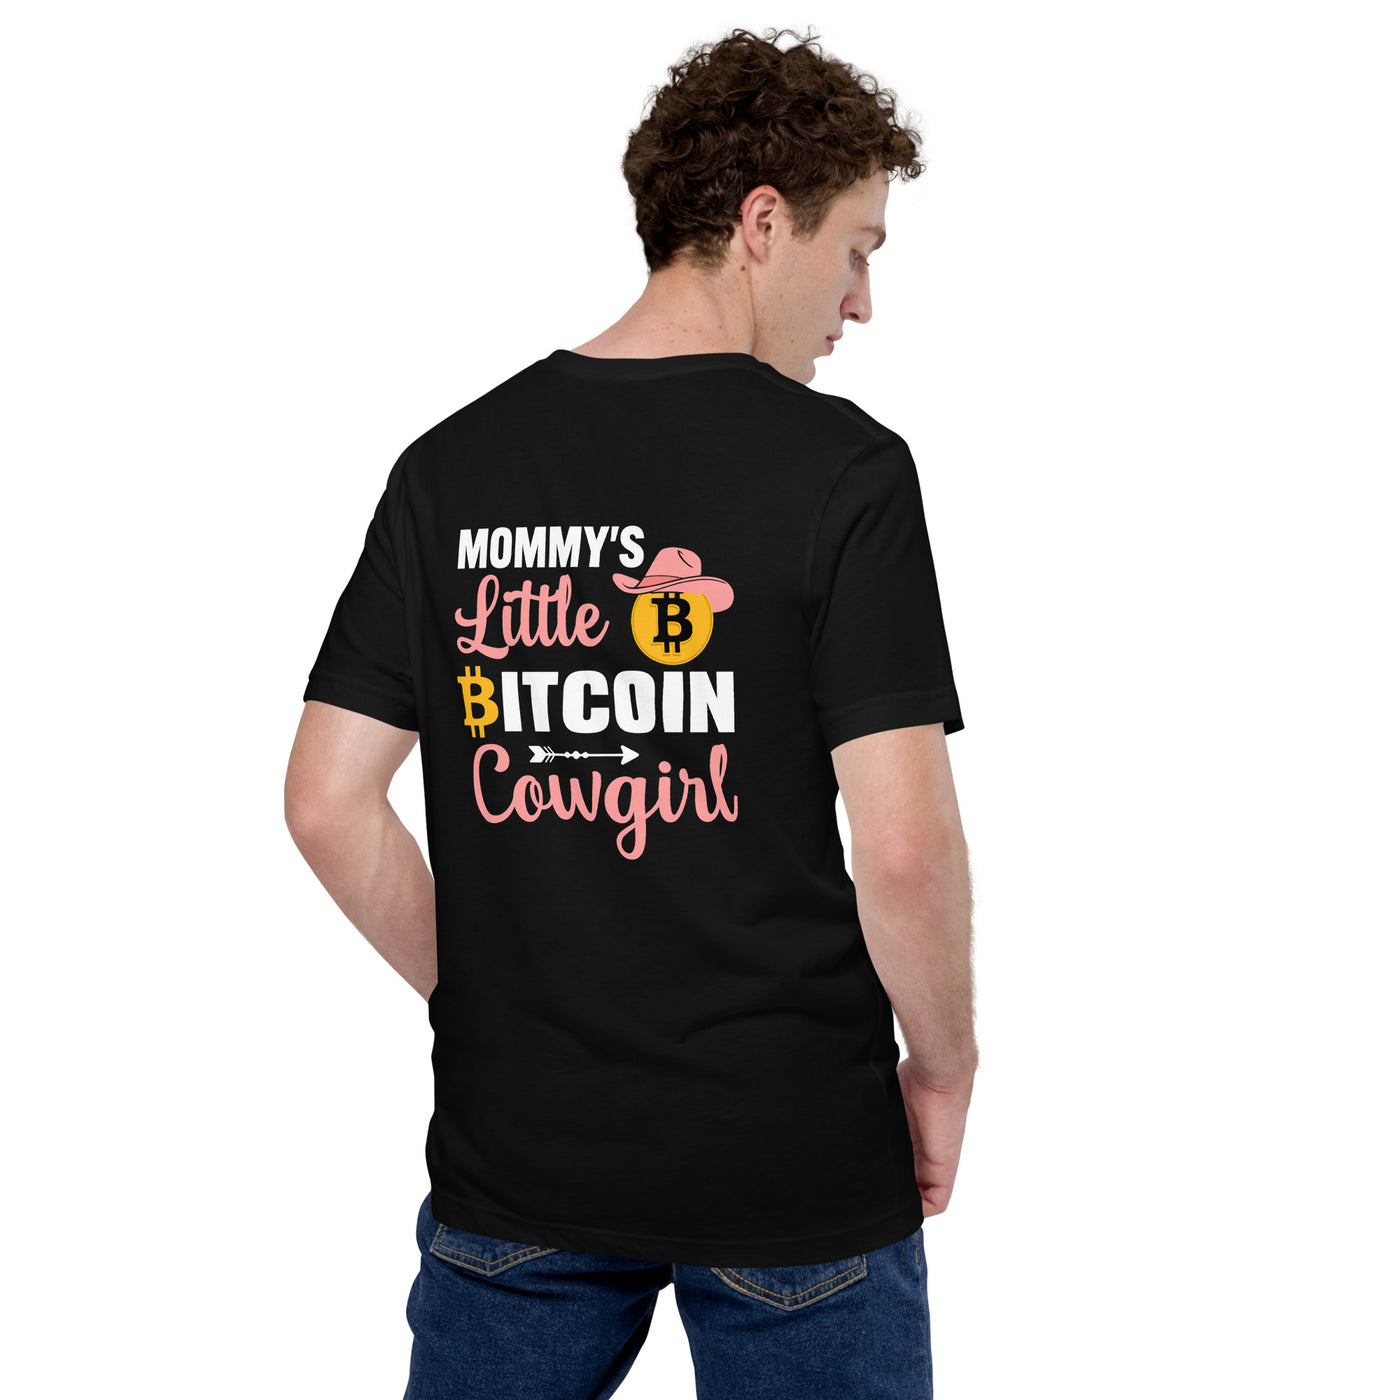 Mommy's Little Bitcoin Cowgirl - Unisex t-shirt